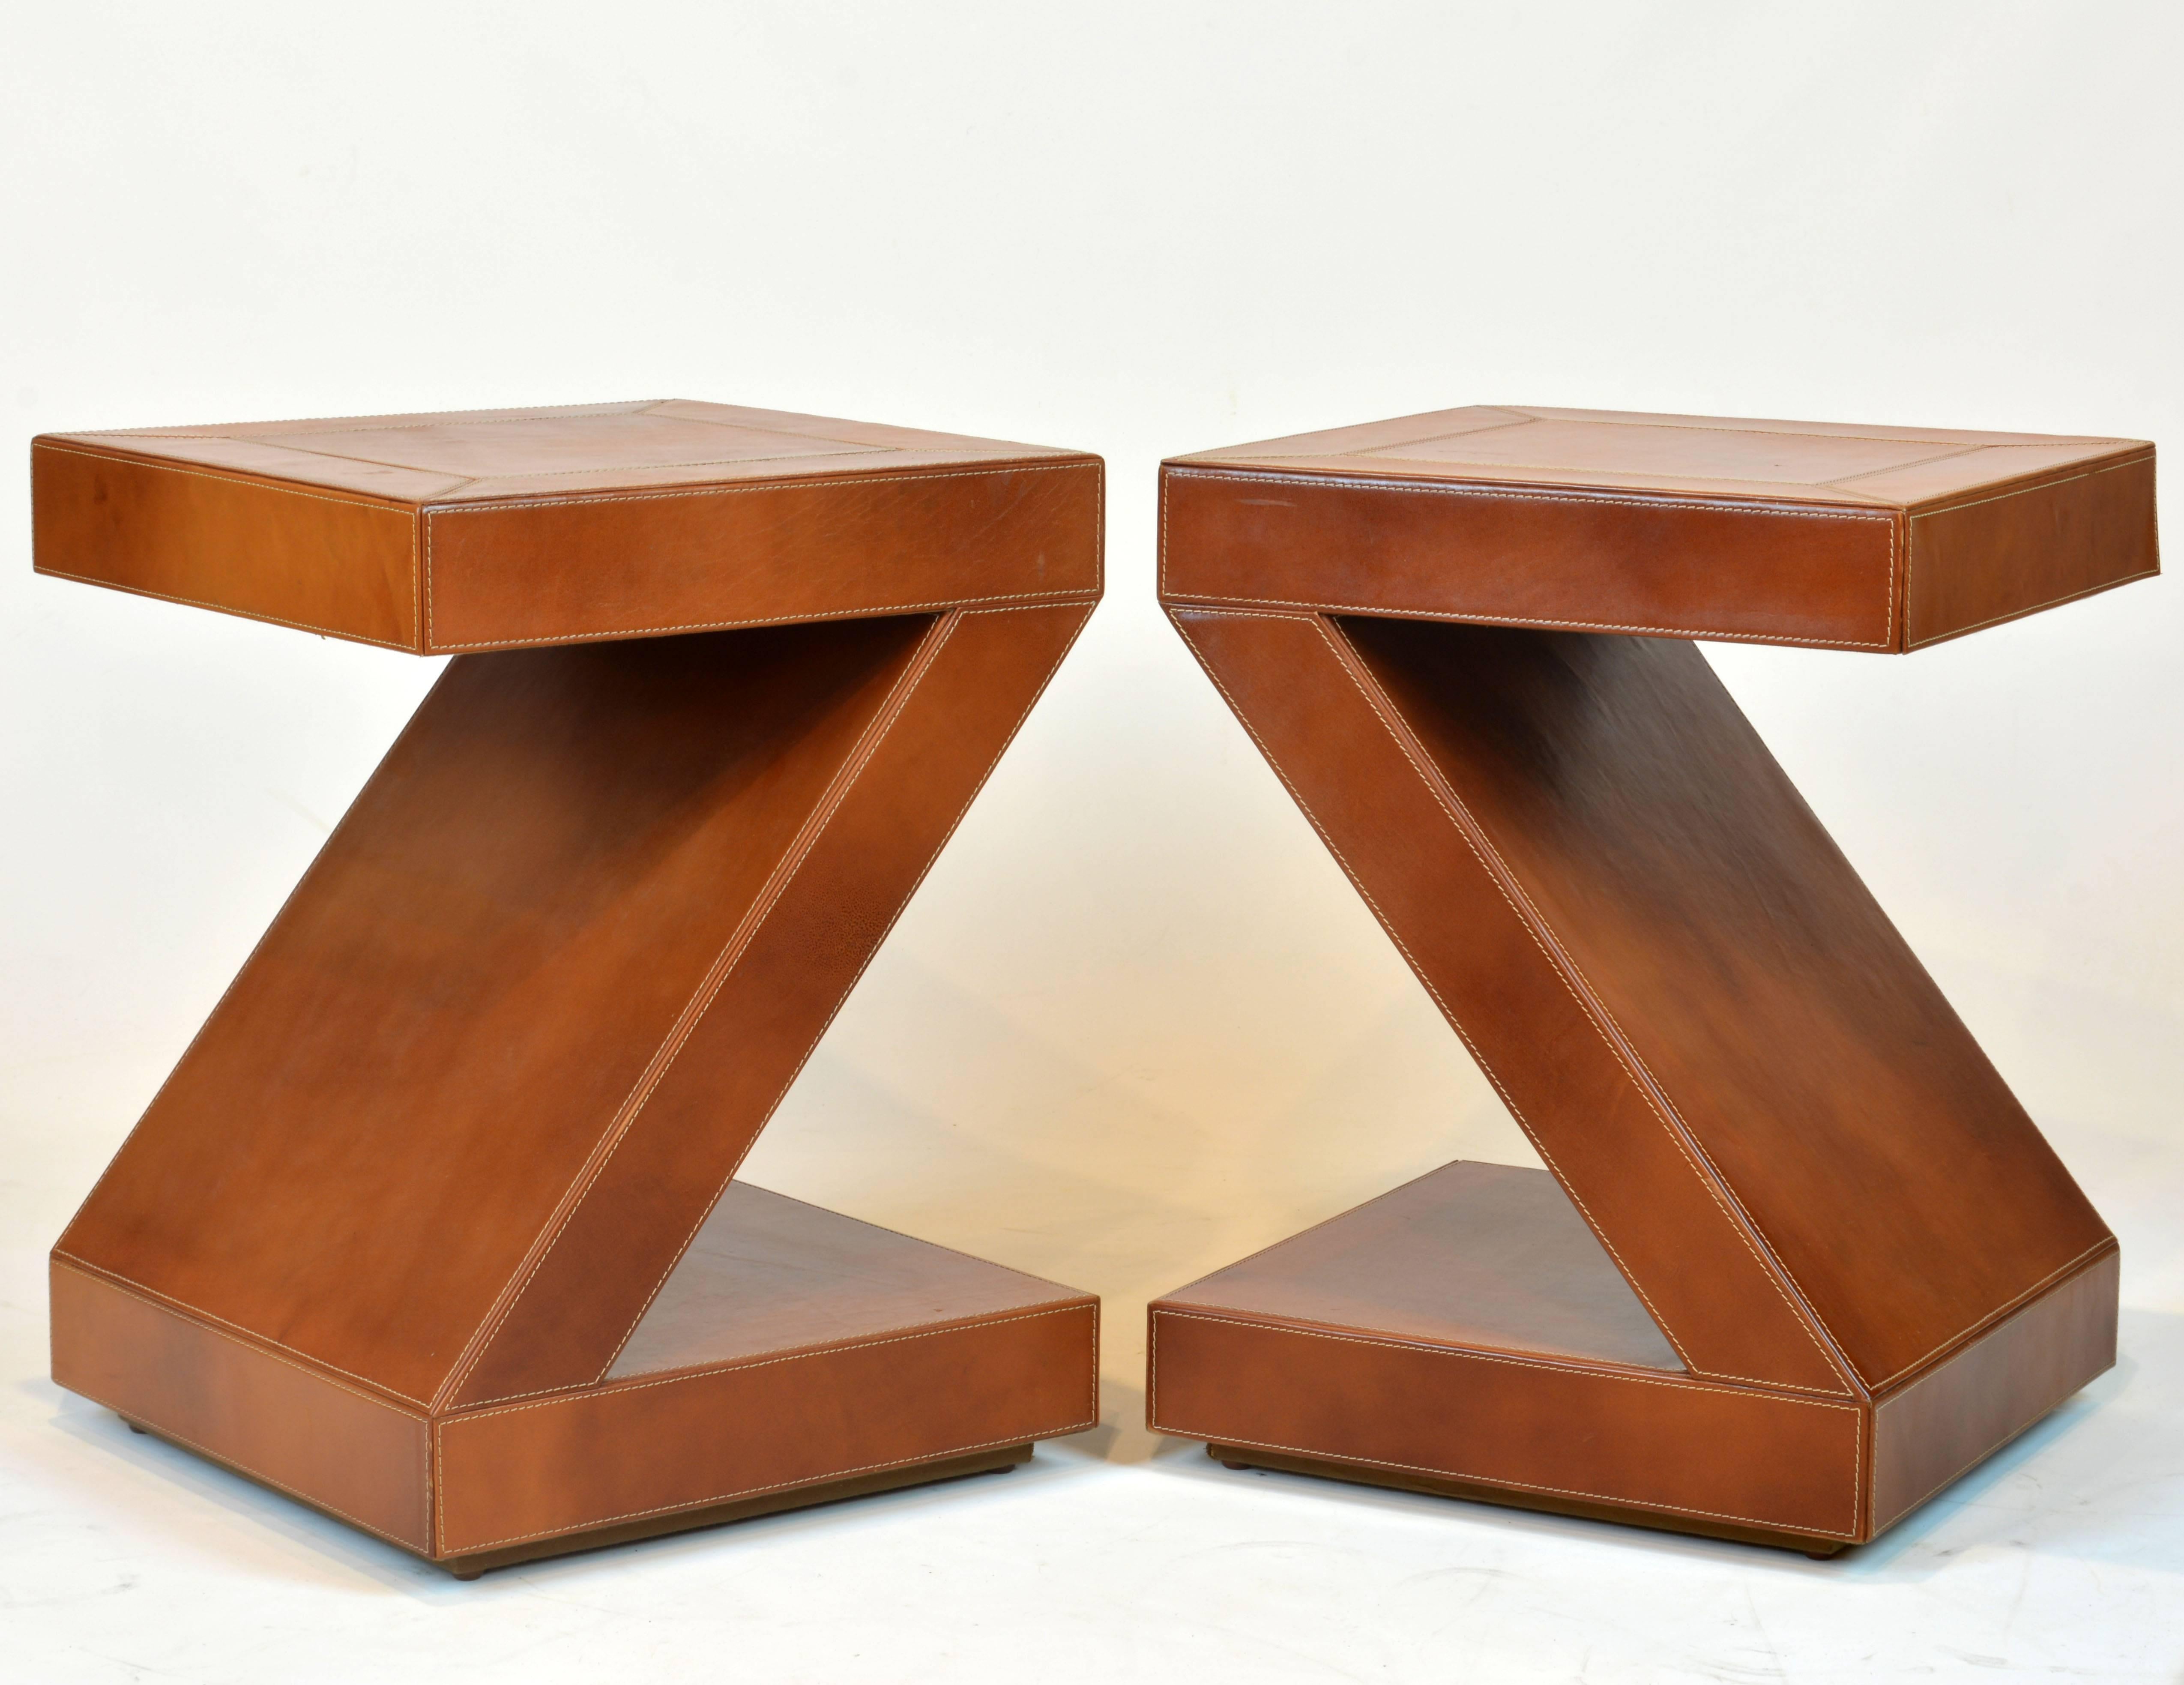 Of impeccable craftsmanship, sturdy construction and Minimalist design these tables gain a subtle feel and color from the first grade and well executed leather covering.